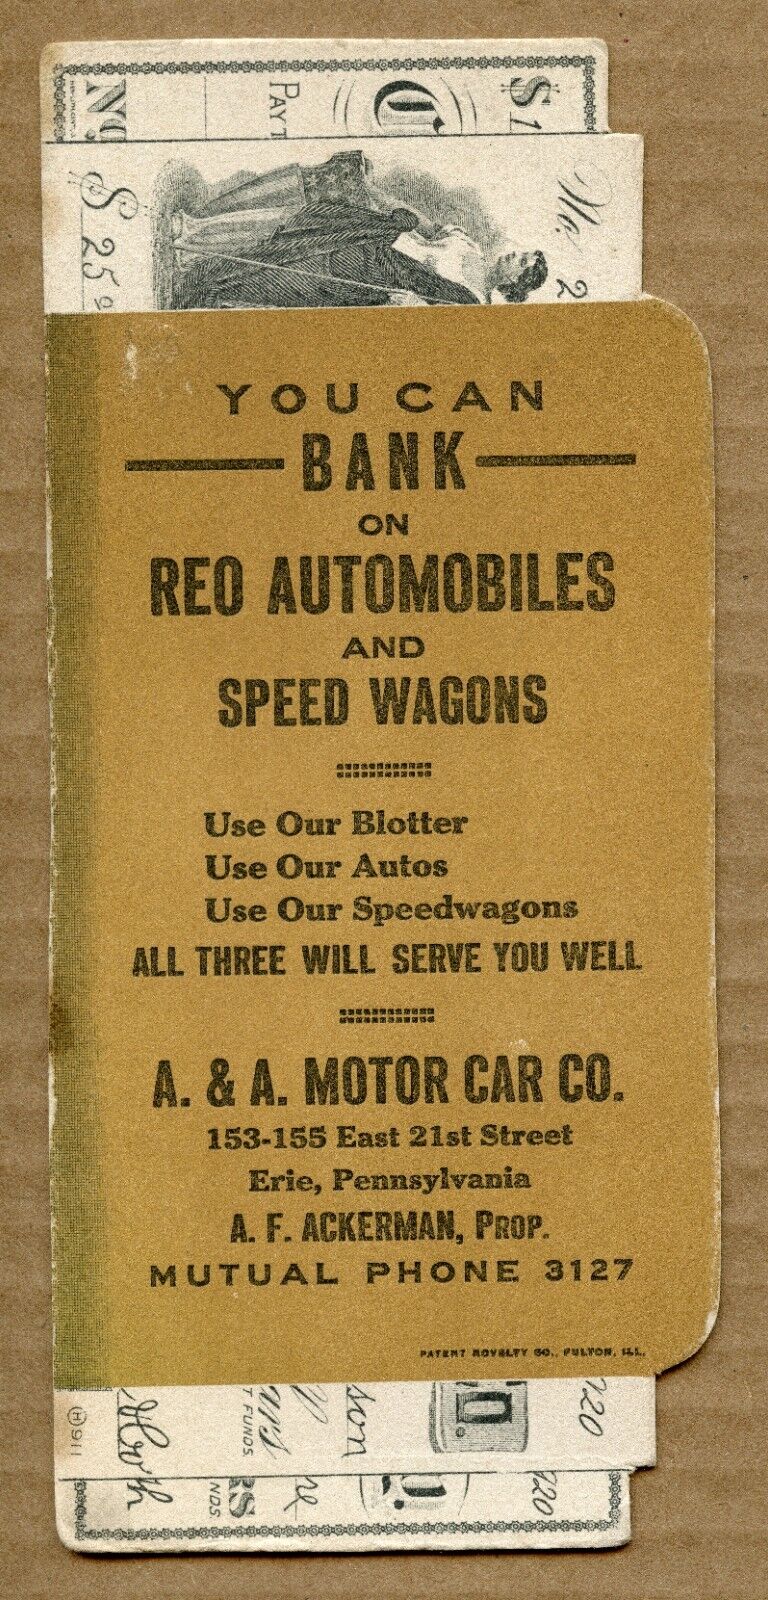 Rare REO Automobiles & Speed Wagons ink blotter - A & A Motor Car Co Erie PA